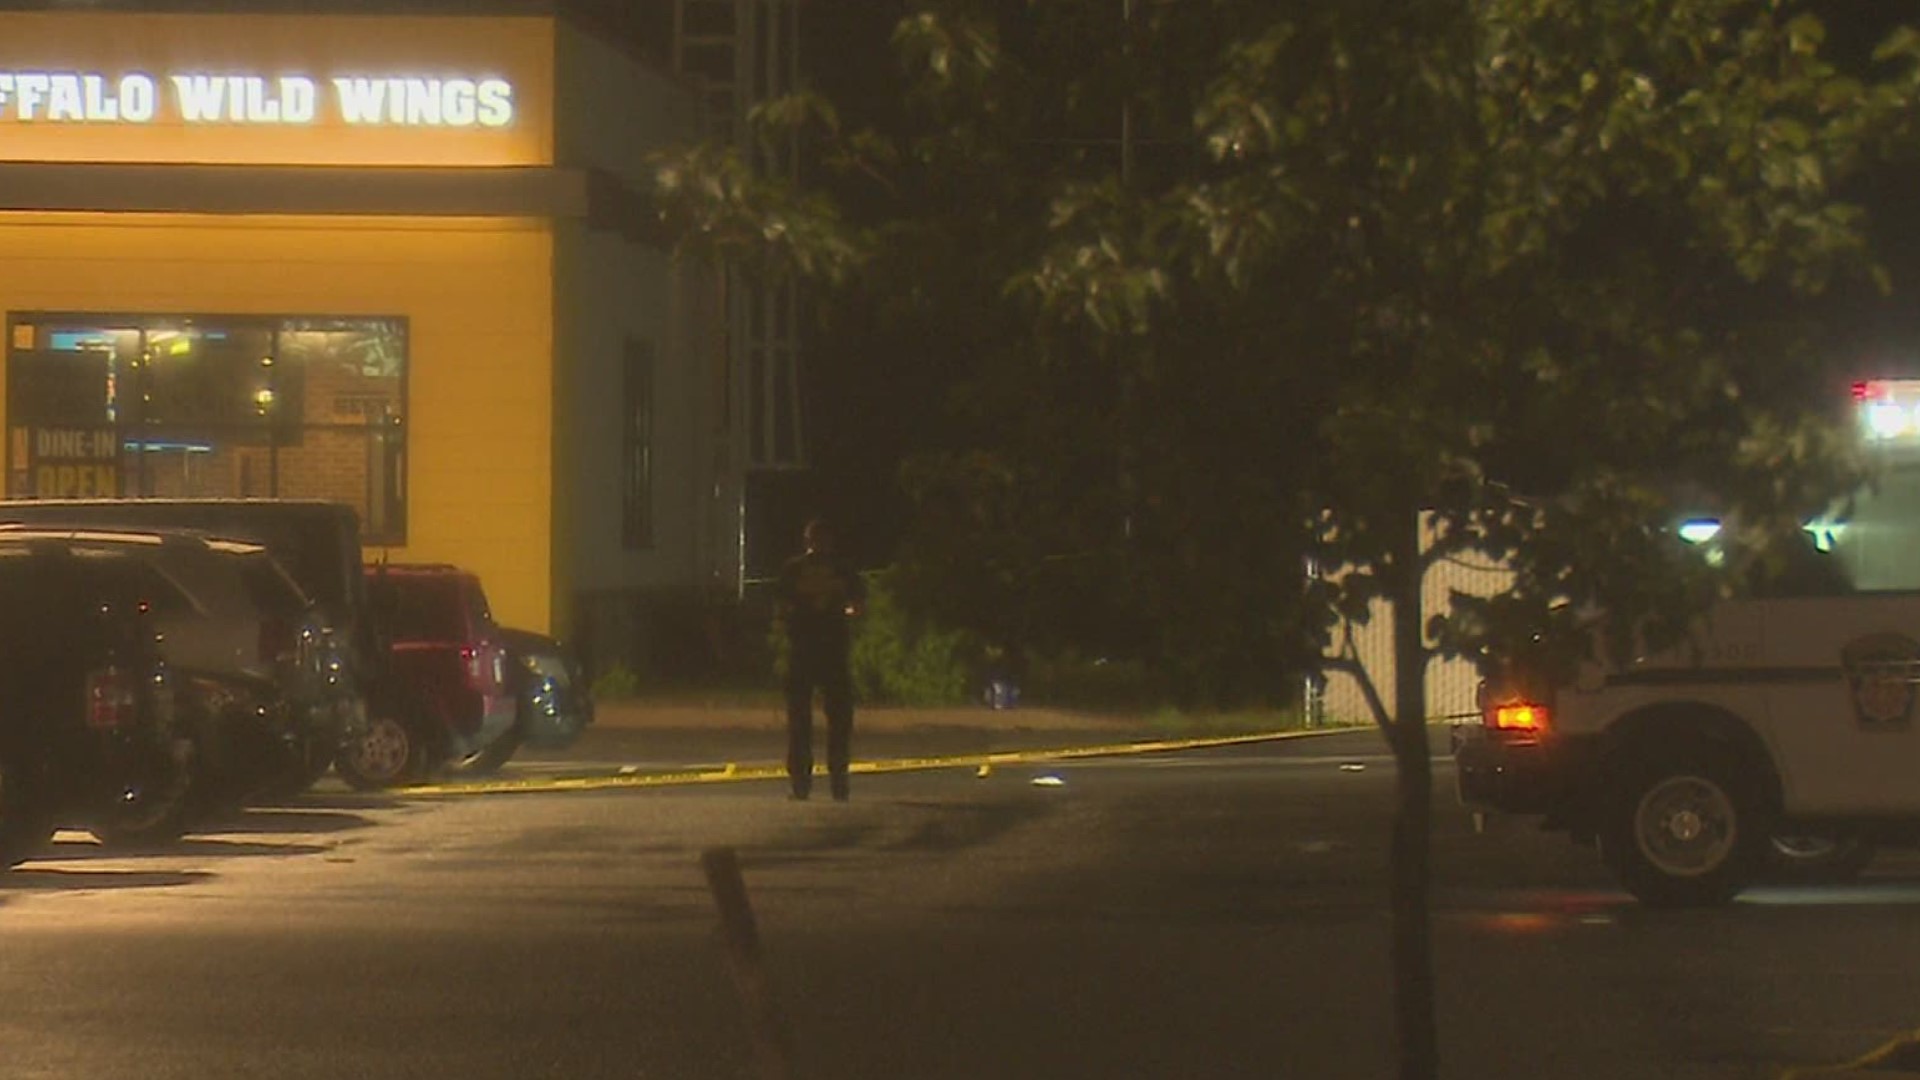 Two people are dead after a shooting outside of the Buffalo Wild Wings in Selinsgrove Friday night. Newswatch 16 spoke to witnesses and folks who live in the area.